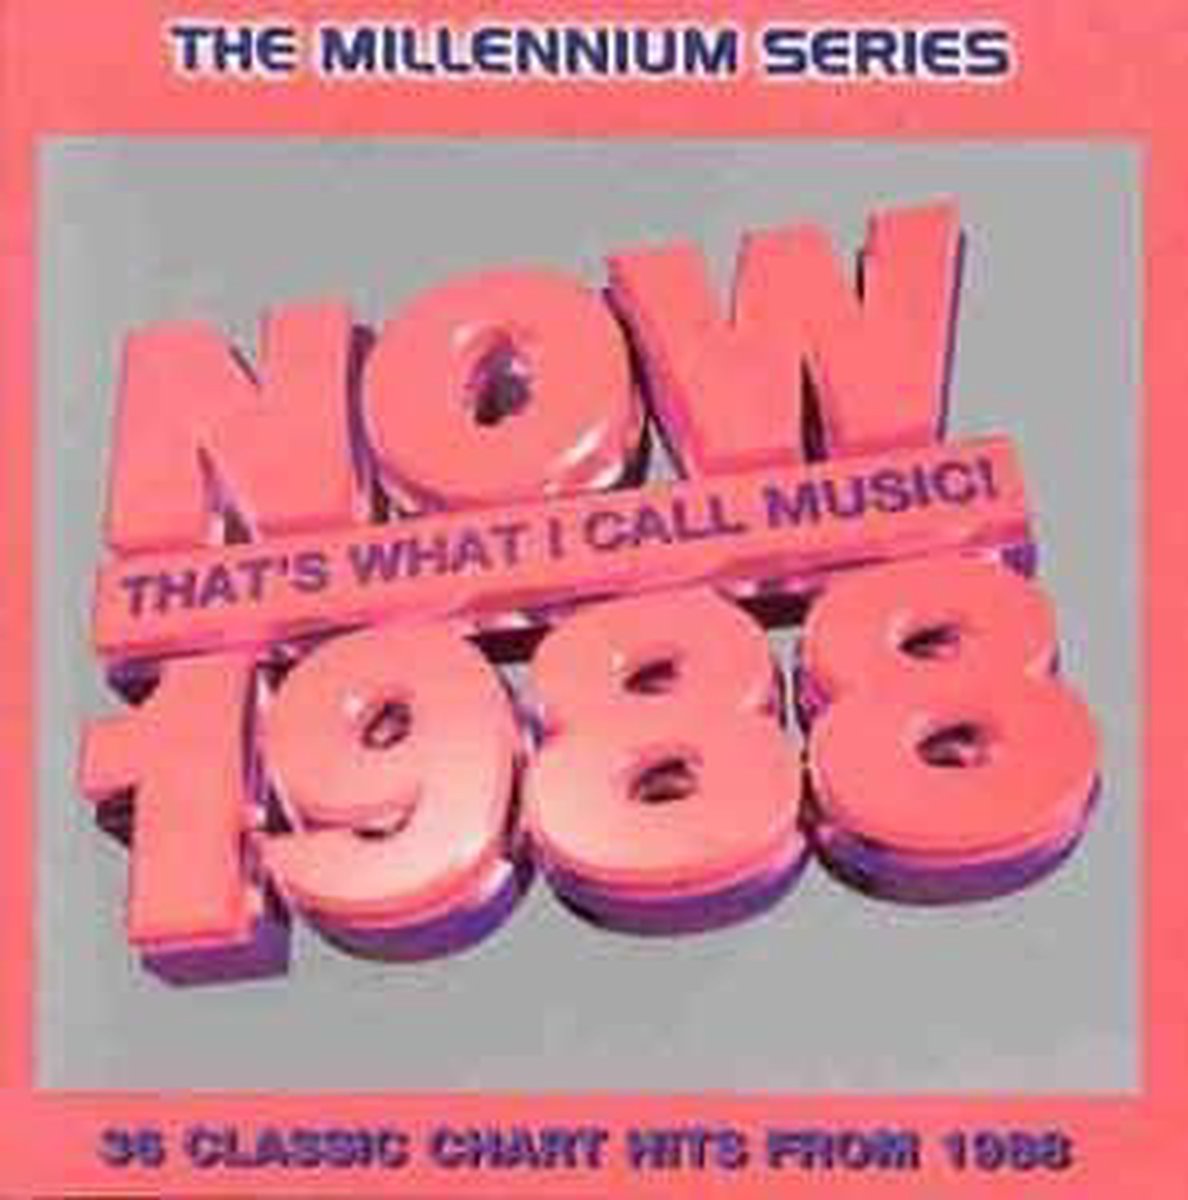 Now That's What I Call Music! 1988 - various artists